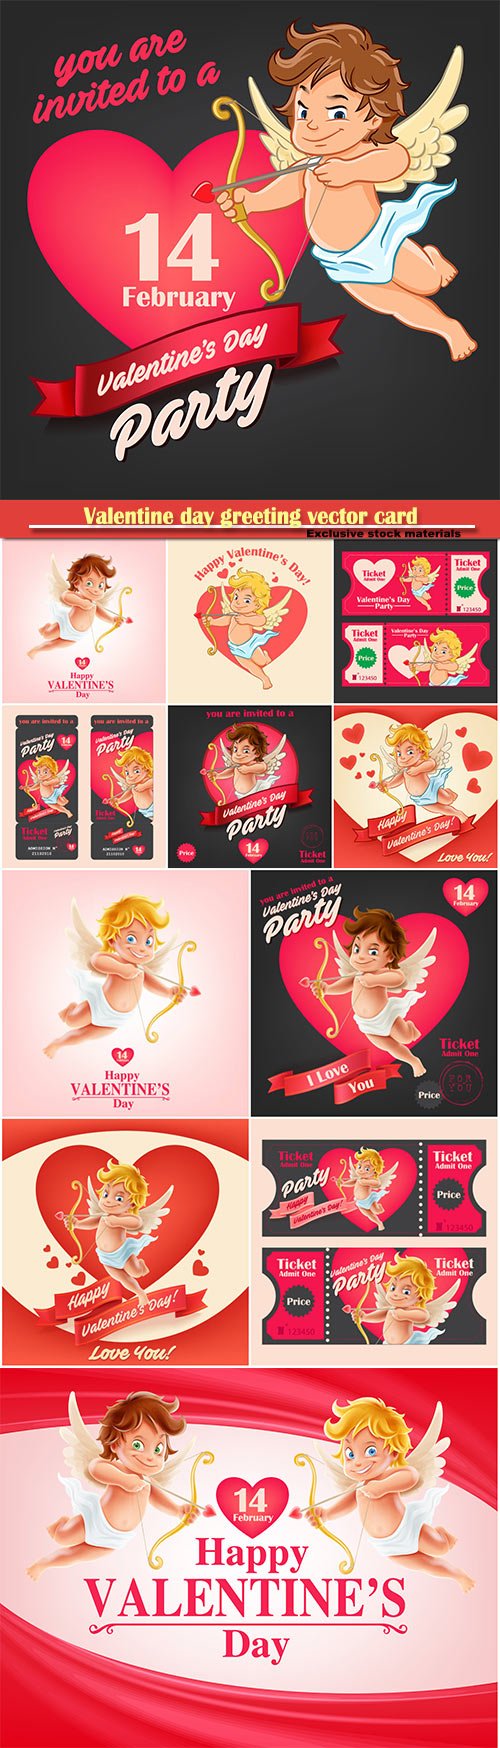 Valentine Day Greeting Vector Card Vol 5